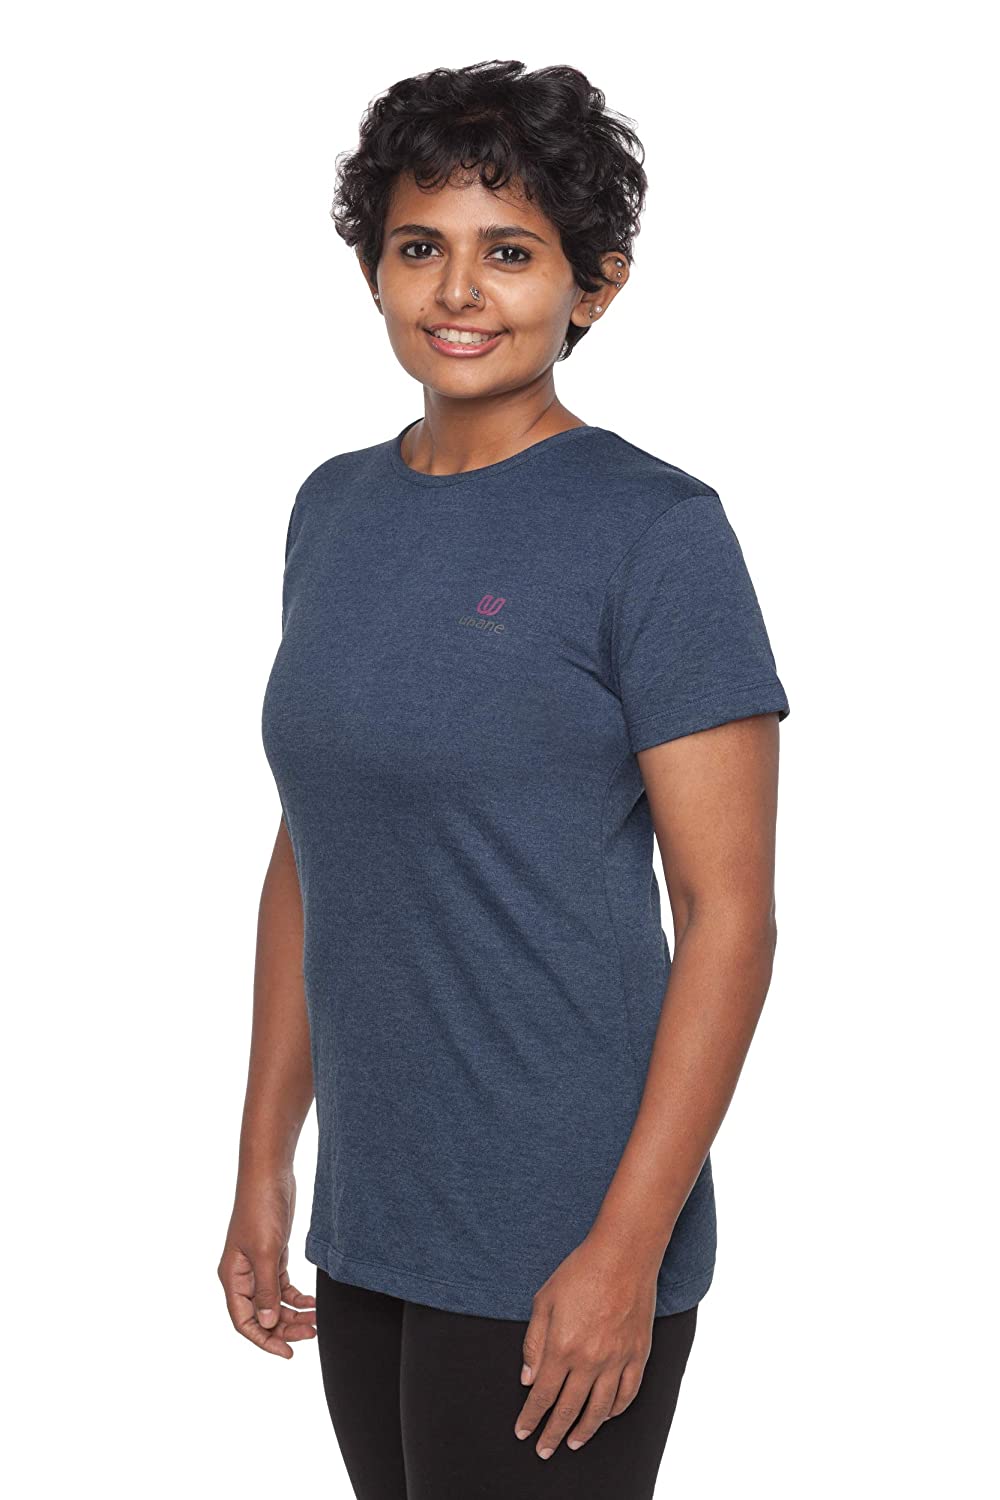 Uhane Women's Yoga and Gym Cotton Work-Out Round Neck Straight Cut Plain T- Shirt (Dark Blue) Short Sleeves Top for Sports and Fitness – Uhane Fitness